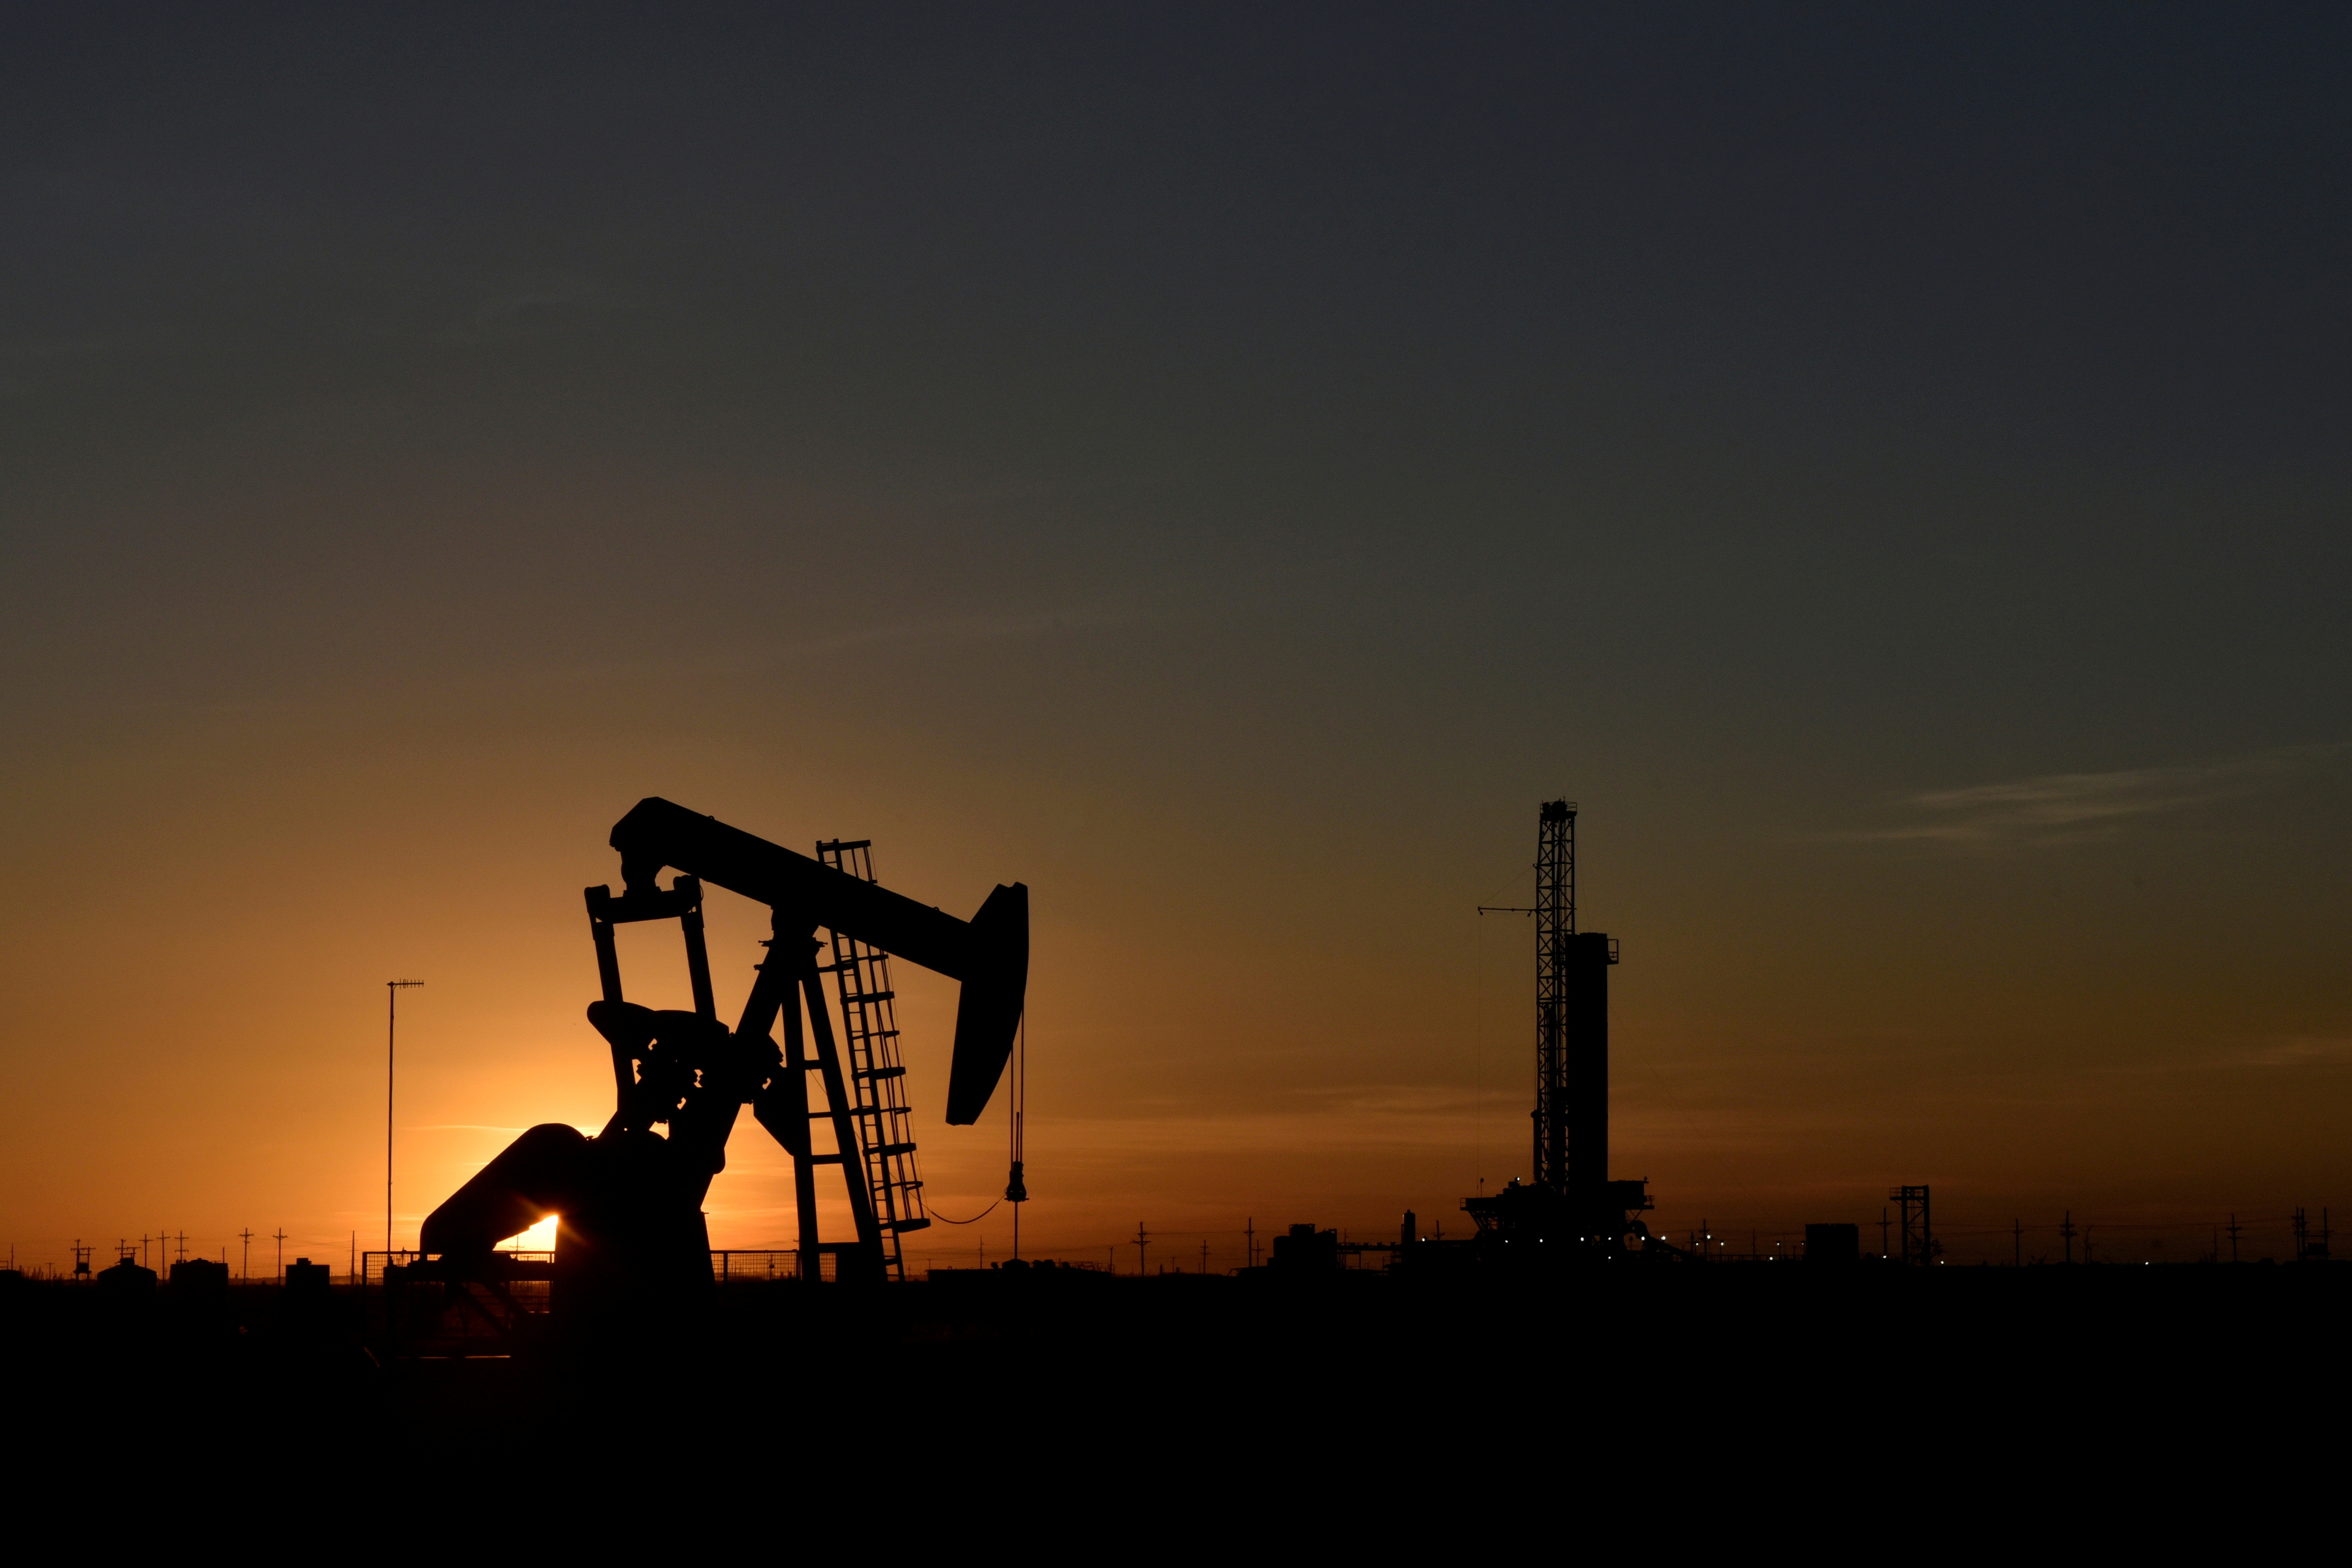 A pump jack operates in front of a drilling rig at sunset in an oil field in Midland